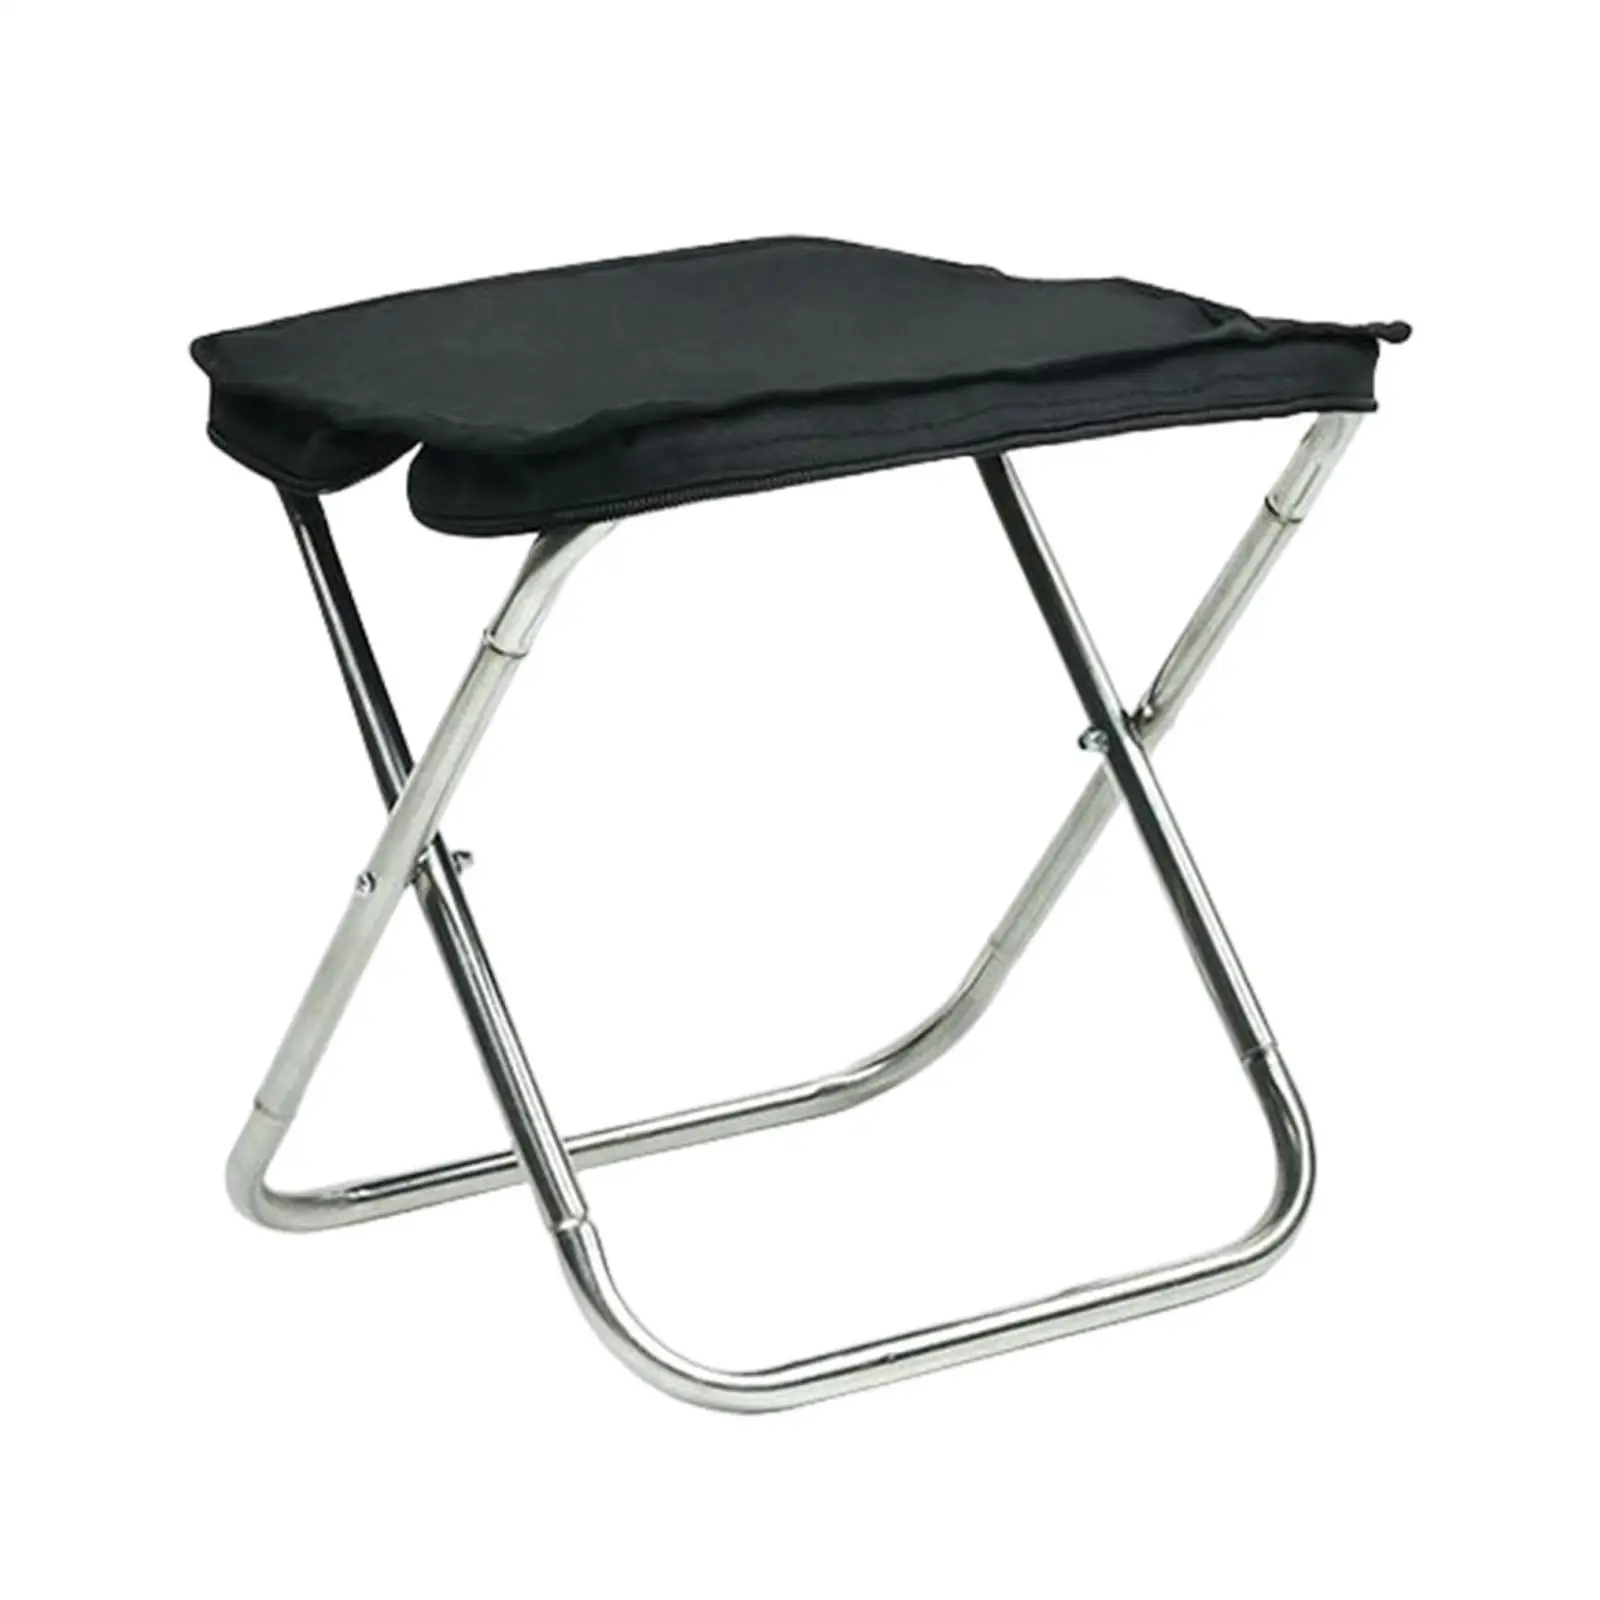 Outdoor Folding Stool Portable Fishing Chair for Backyard Party Backpacking Hiking